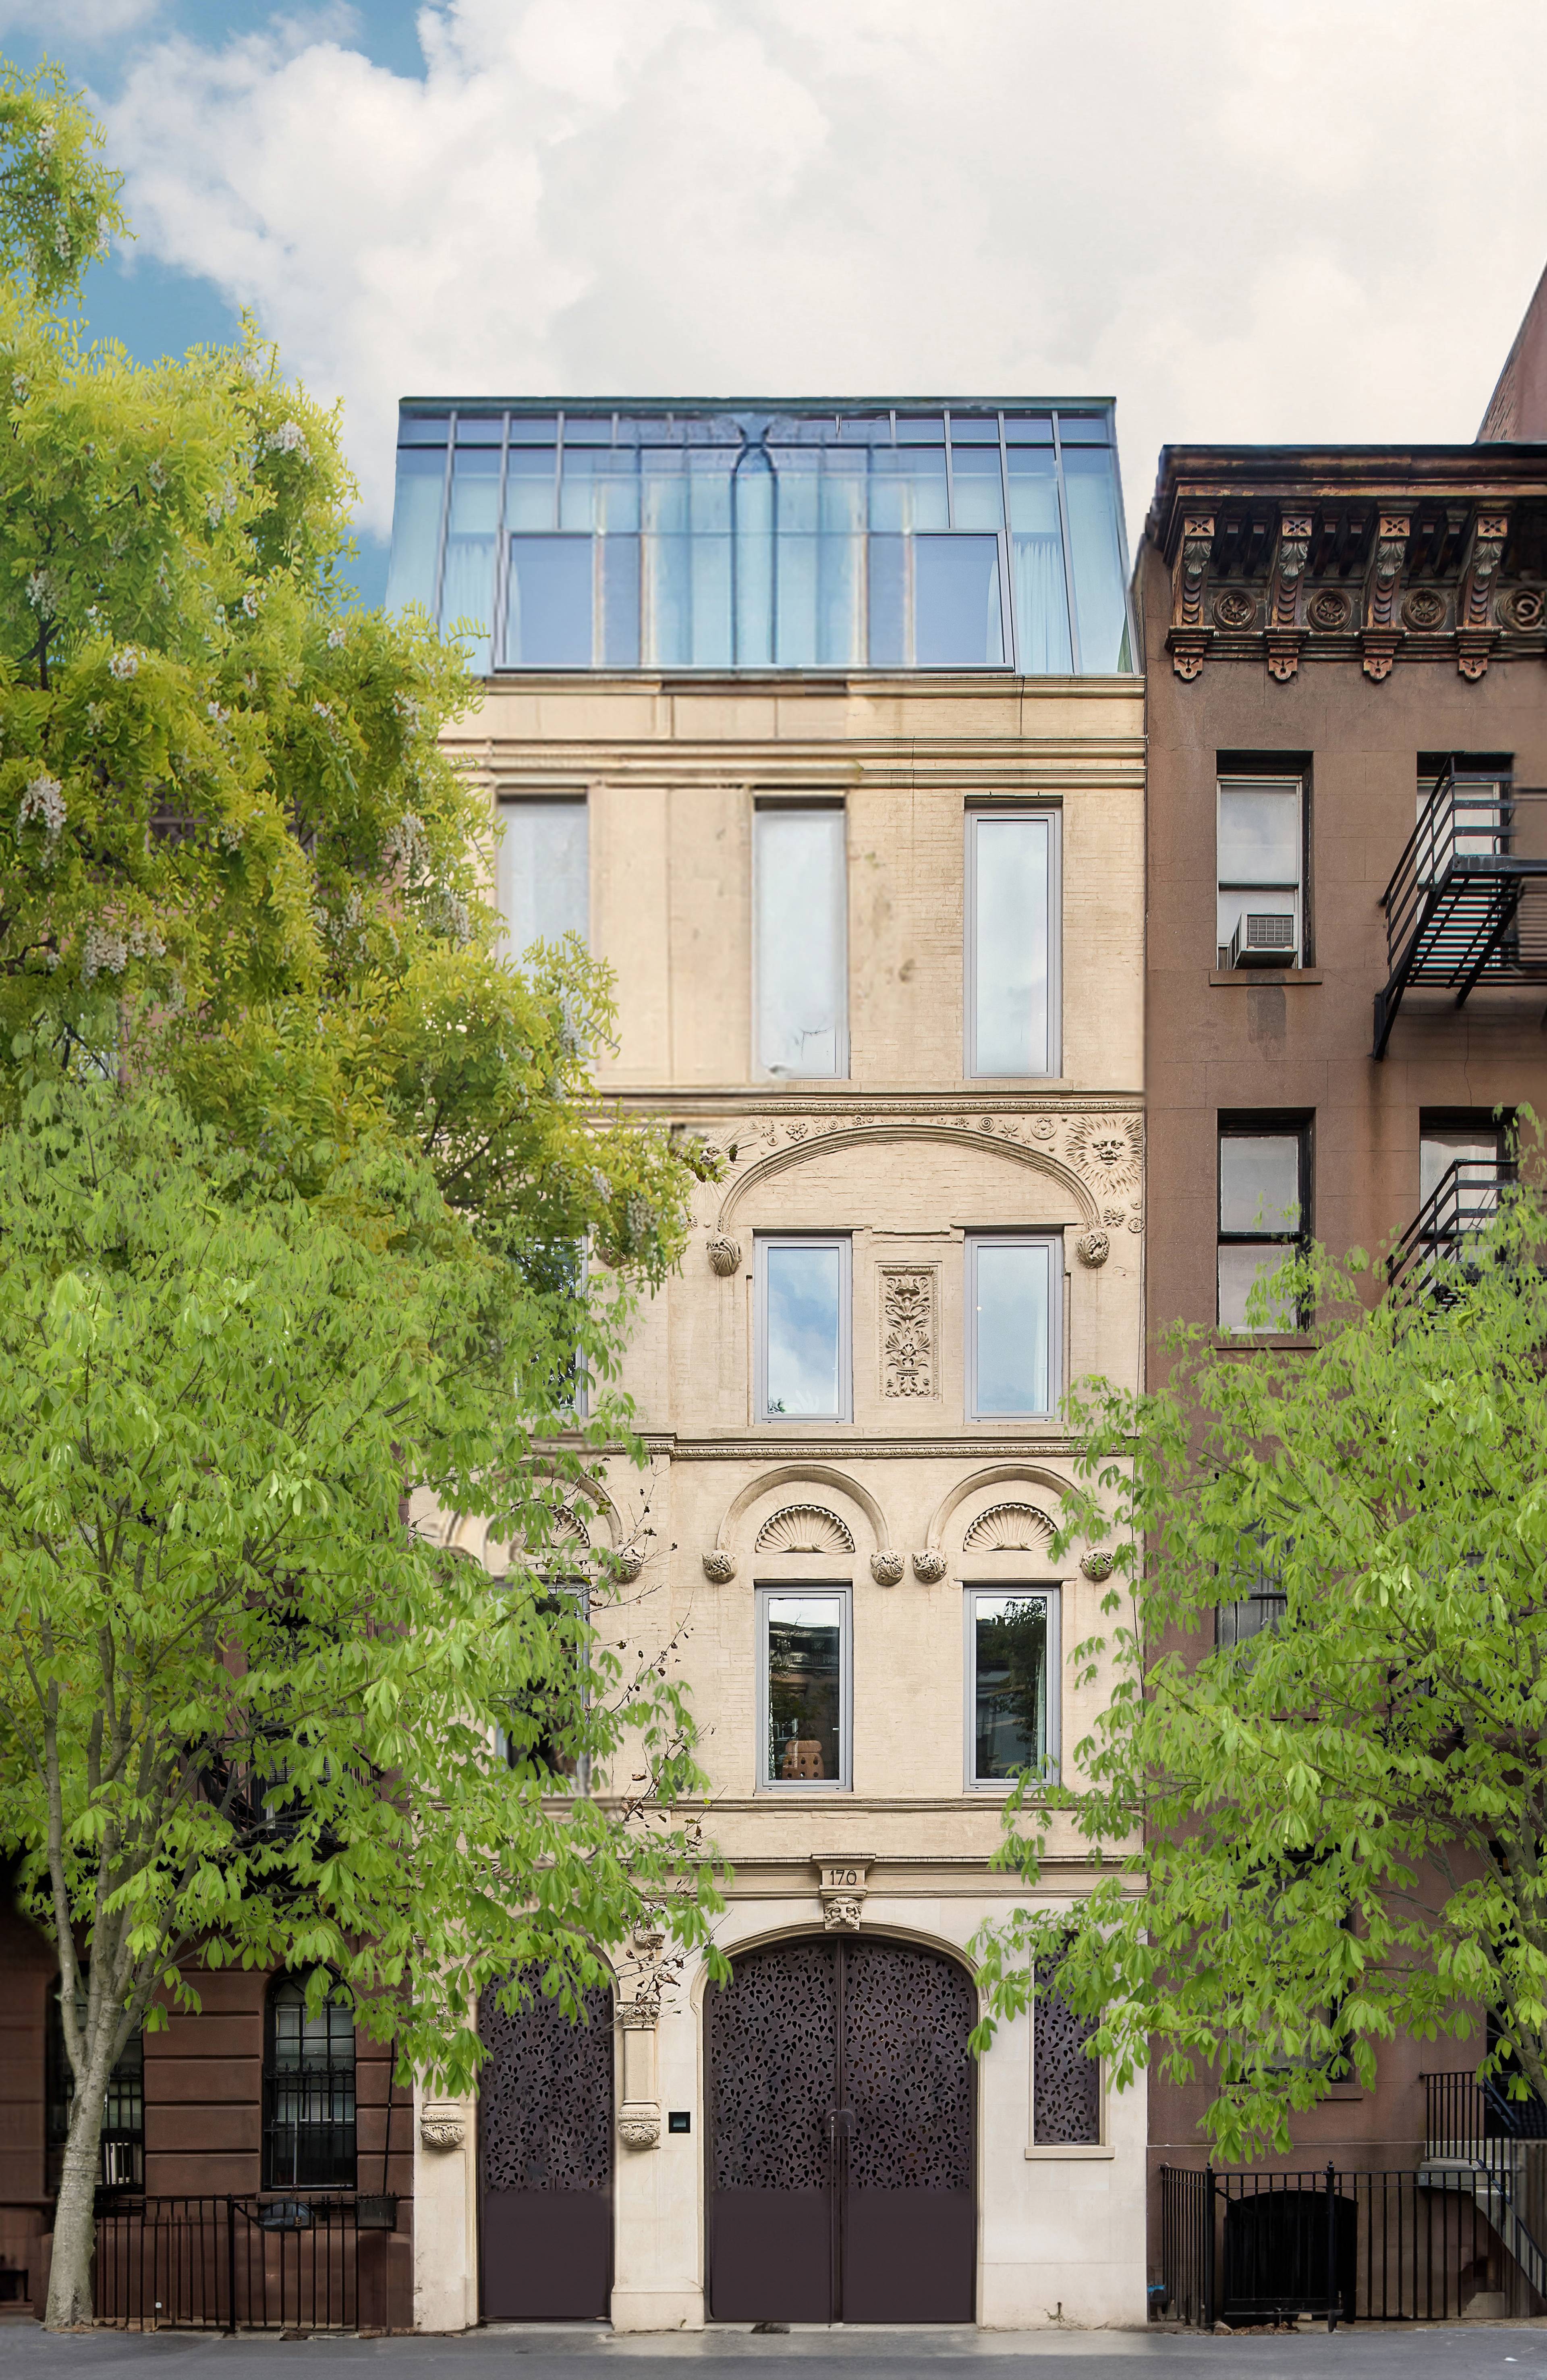 22' WIDE UES MANSION WITH ART GALLERY AND PARKING